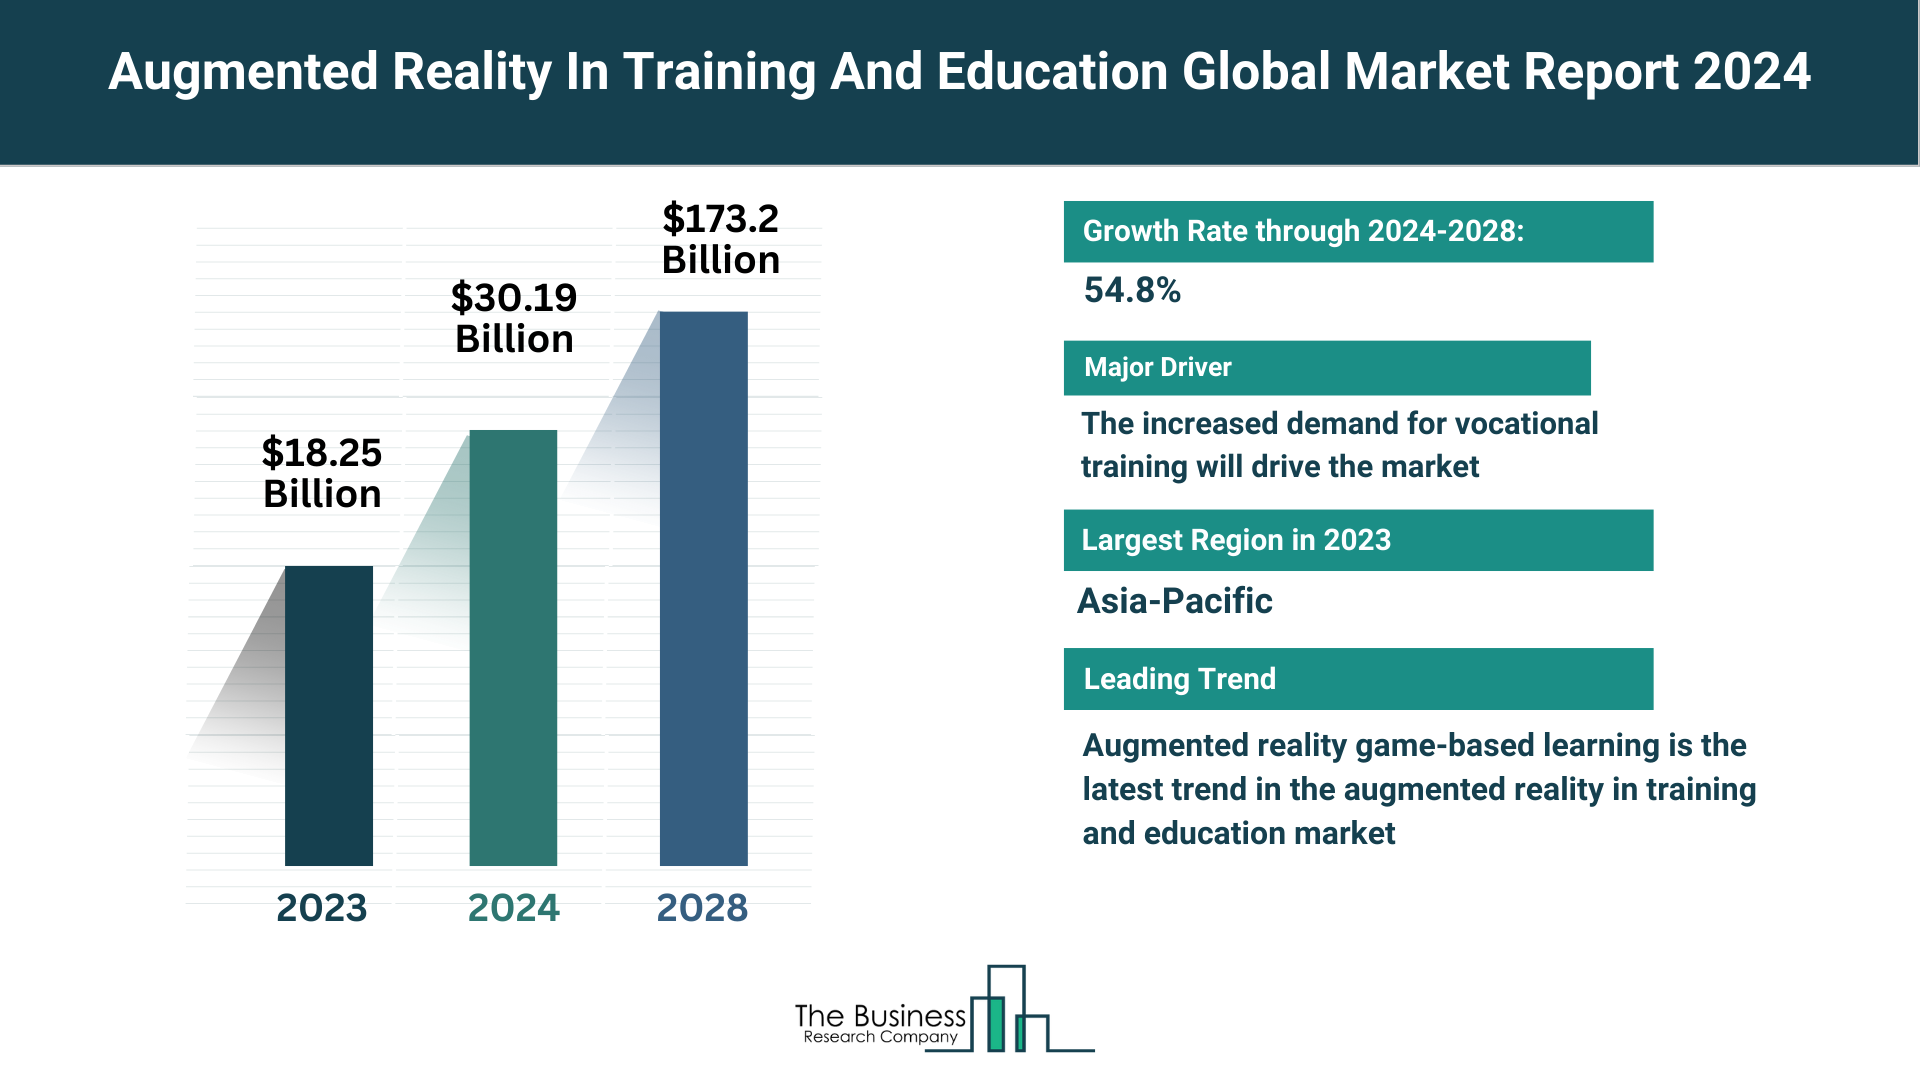 What Are The 5 Takeaways From The Augmented Reality In Training And Education Market Overview 2024